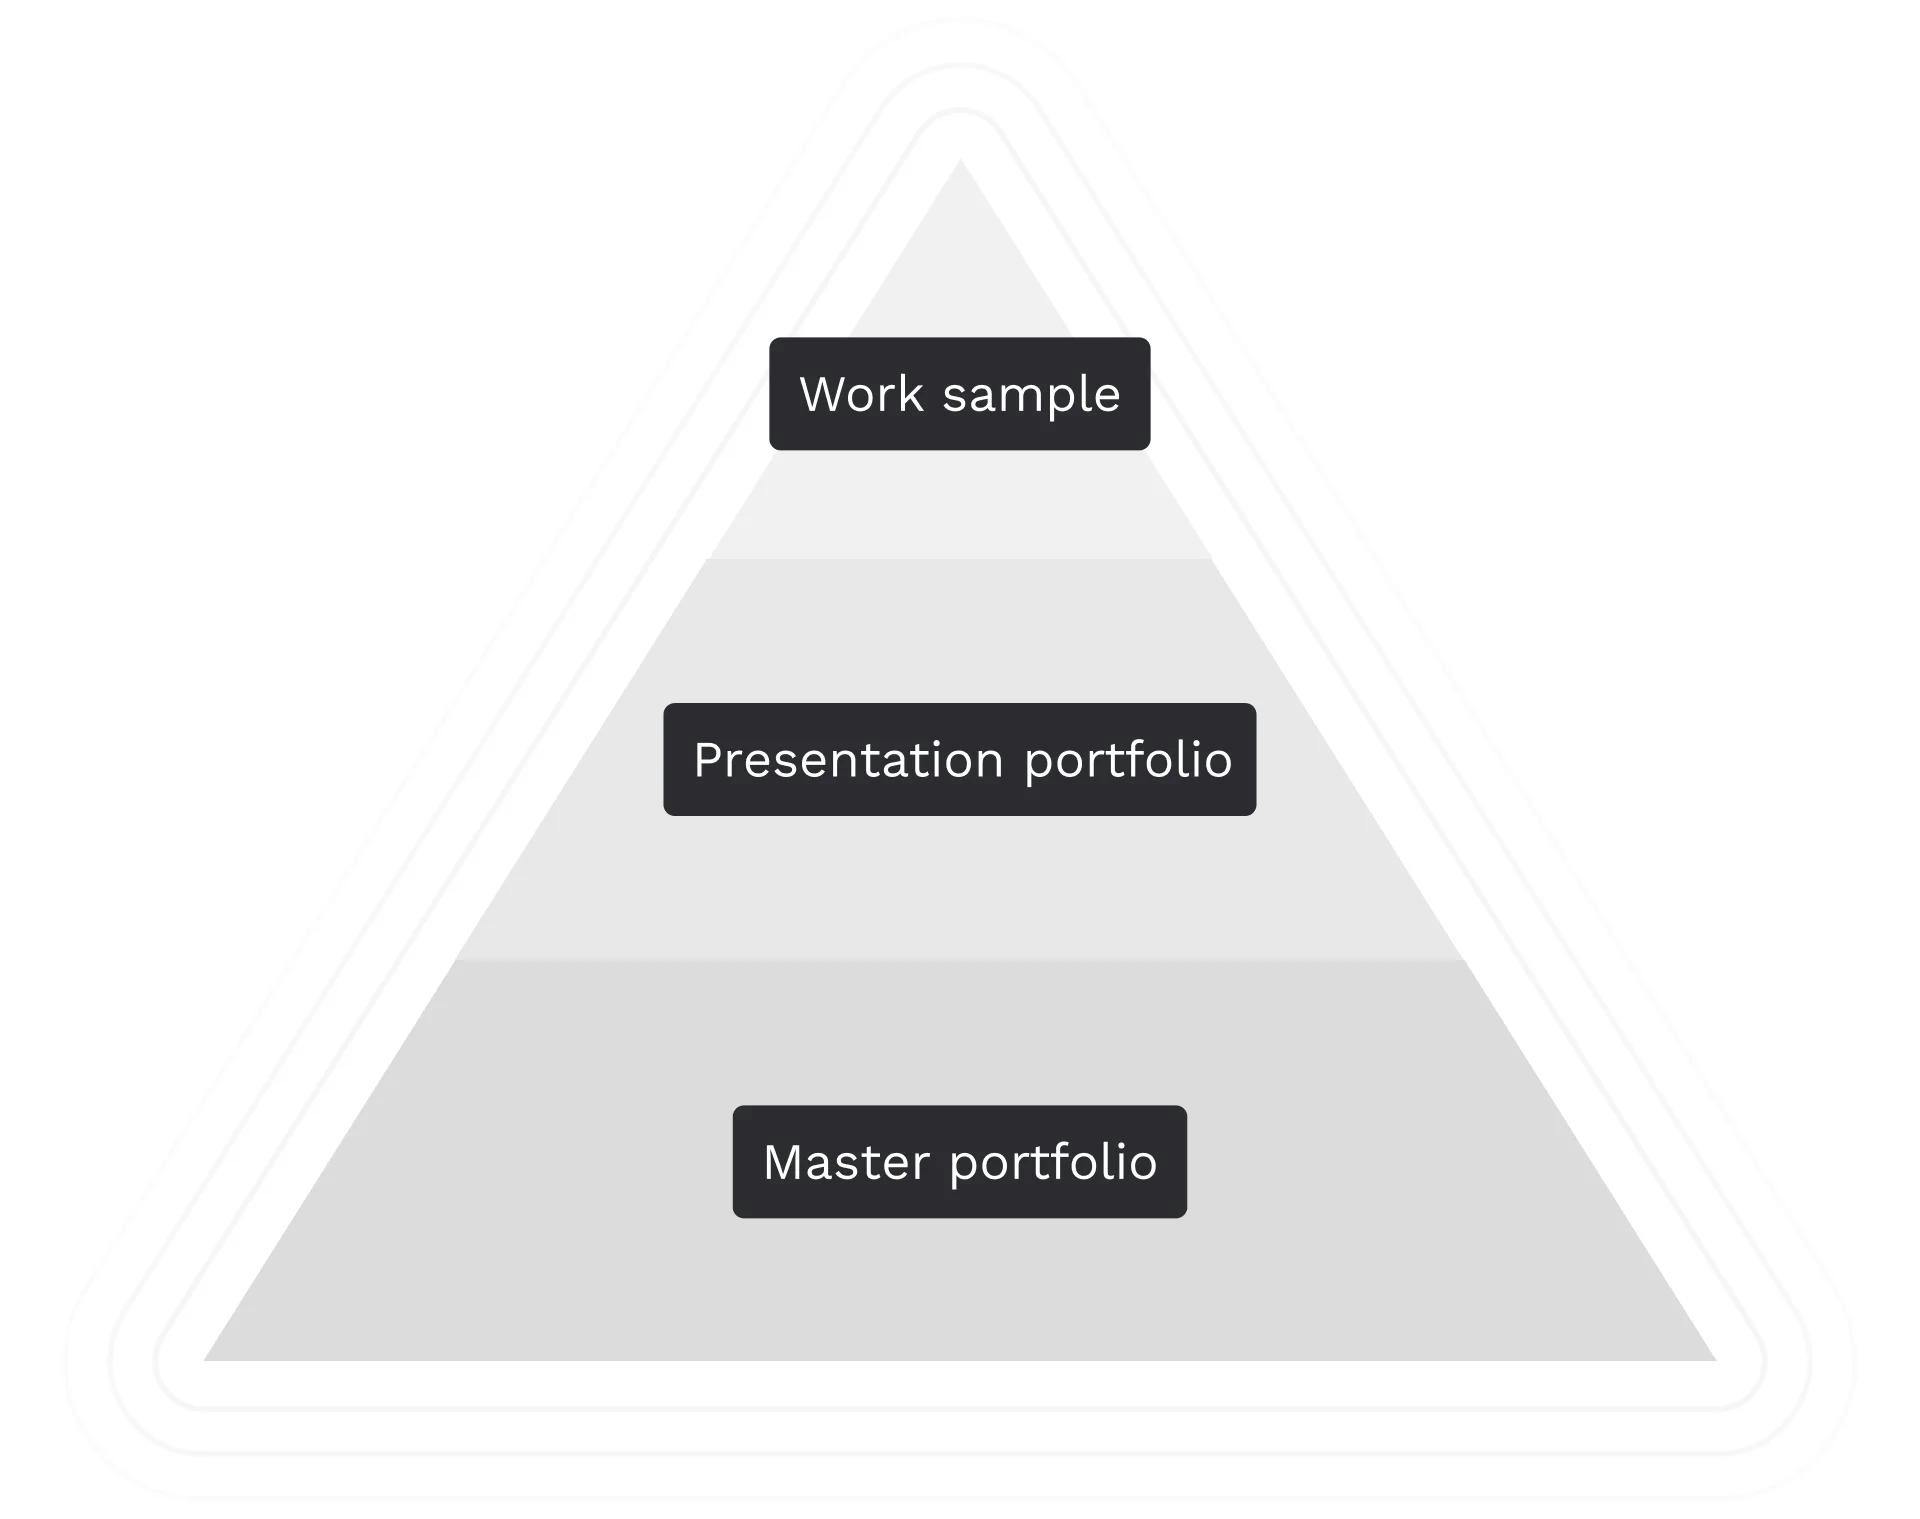 A pyramid with three levels. The bottom is the level of master portfolios, the middle one is for presentation portfolios and the top one is work samples.